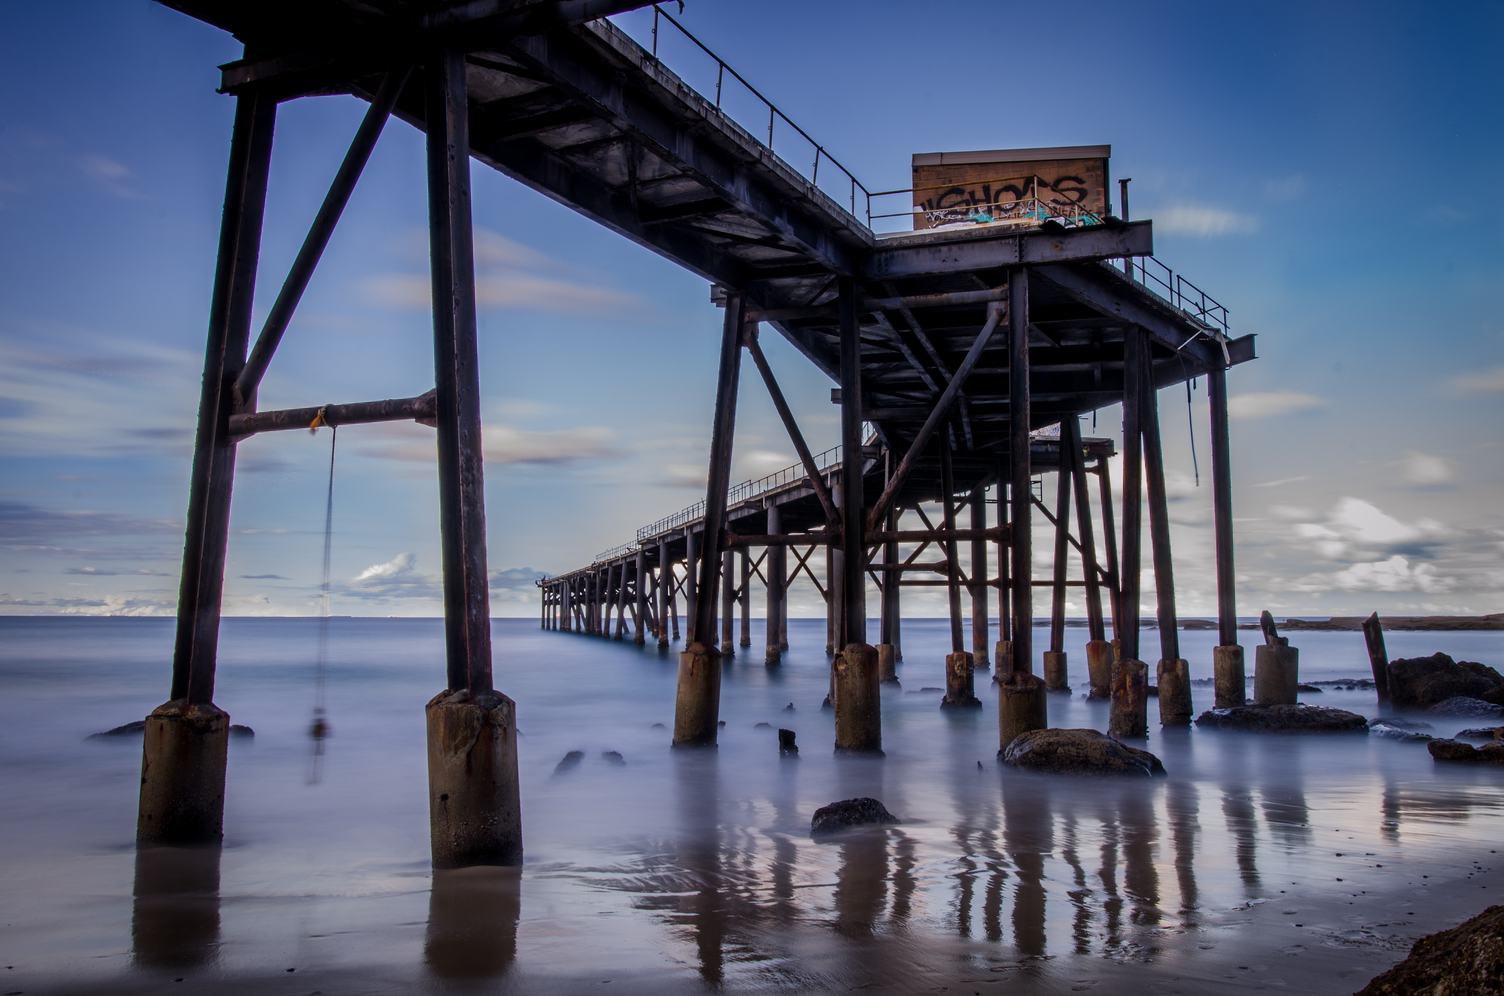 Long Exposure Seaside View with a Long Pier